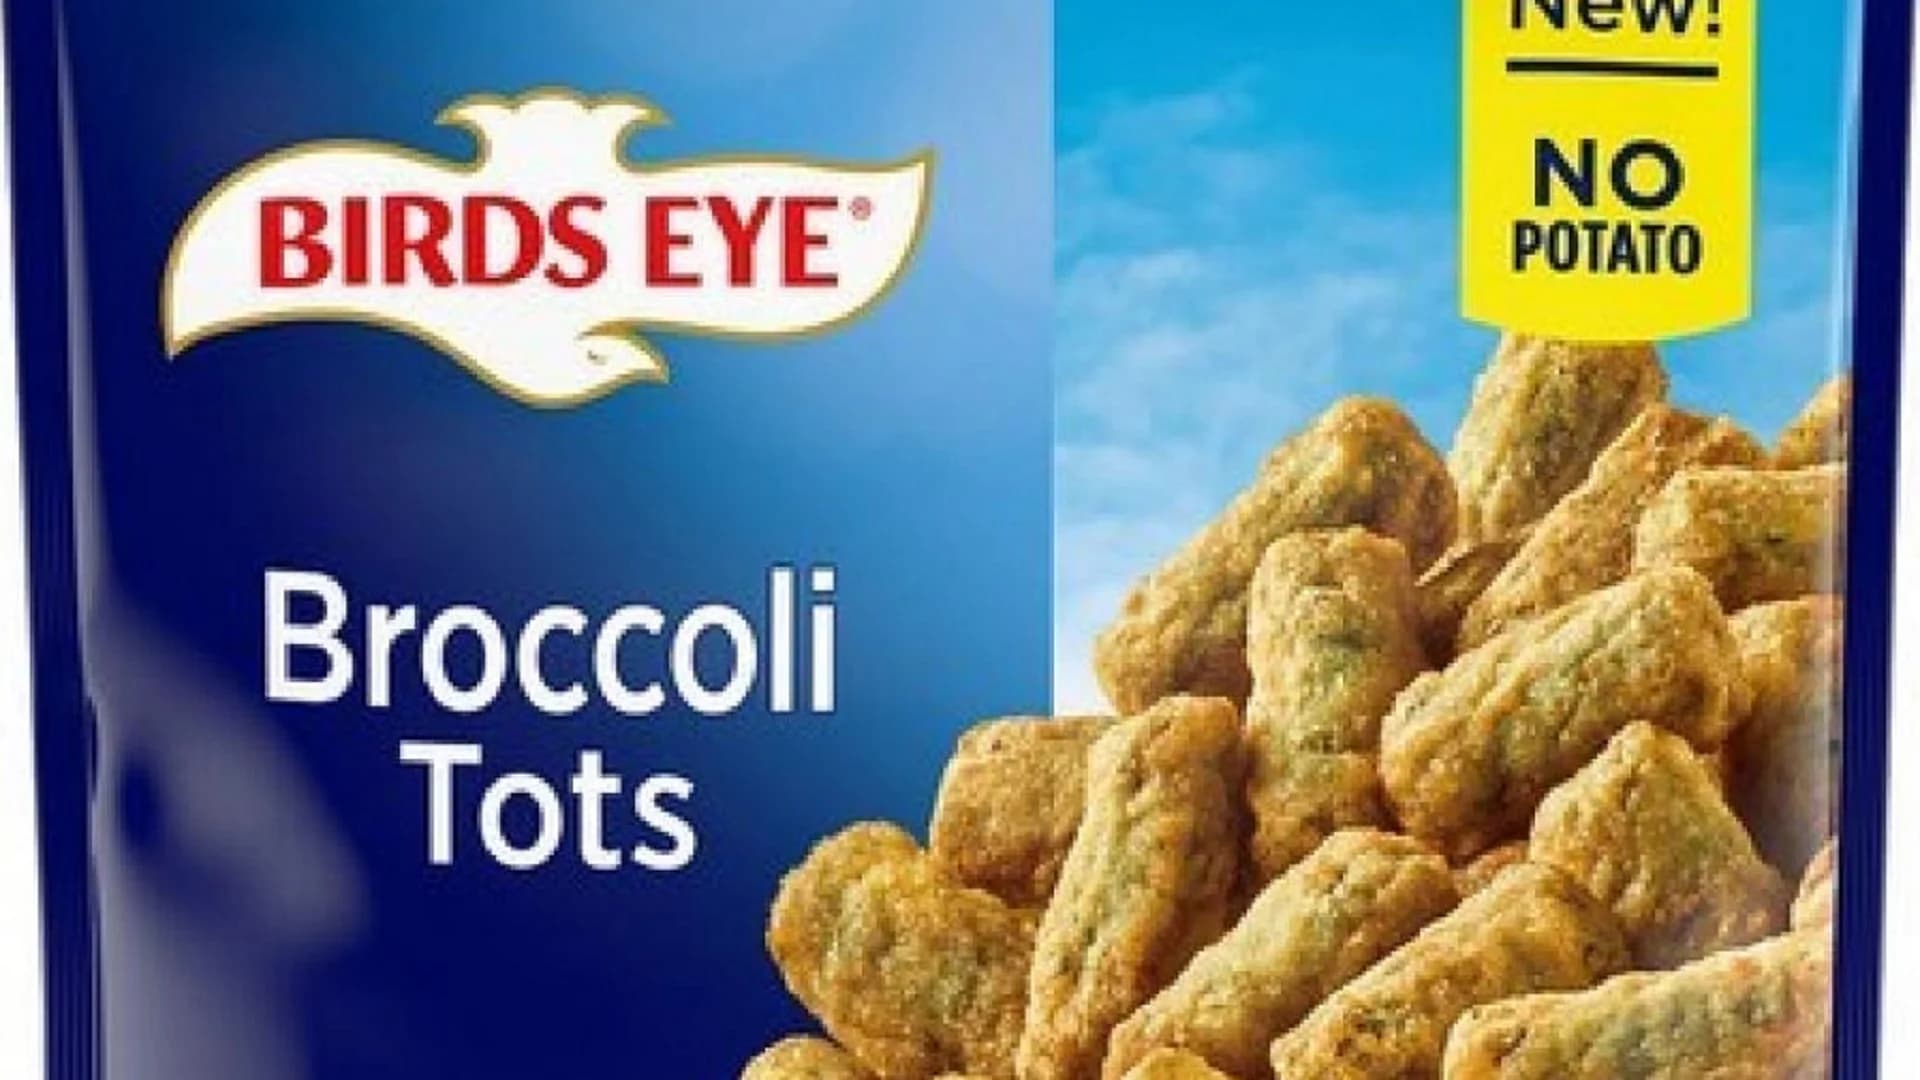 Recall issued on Birds Eye Broccoli Tots due to potential presence of small rocks, metal